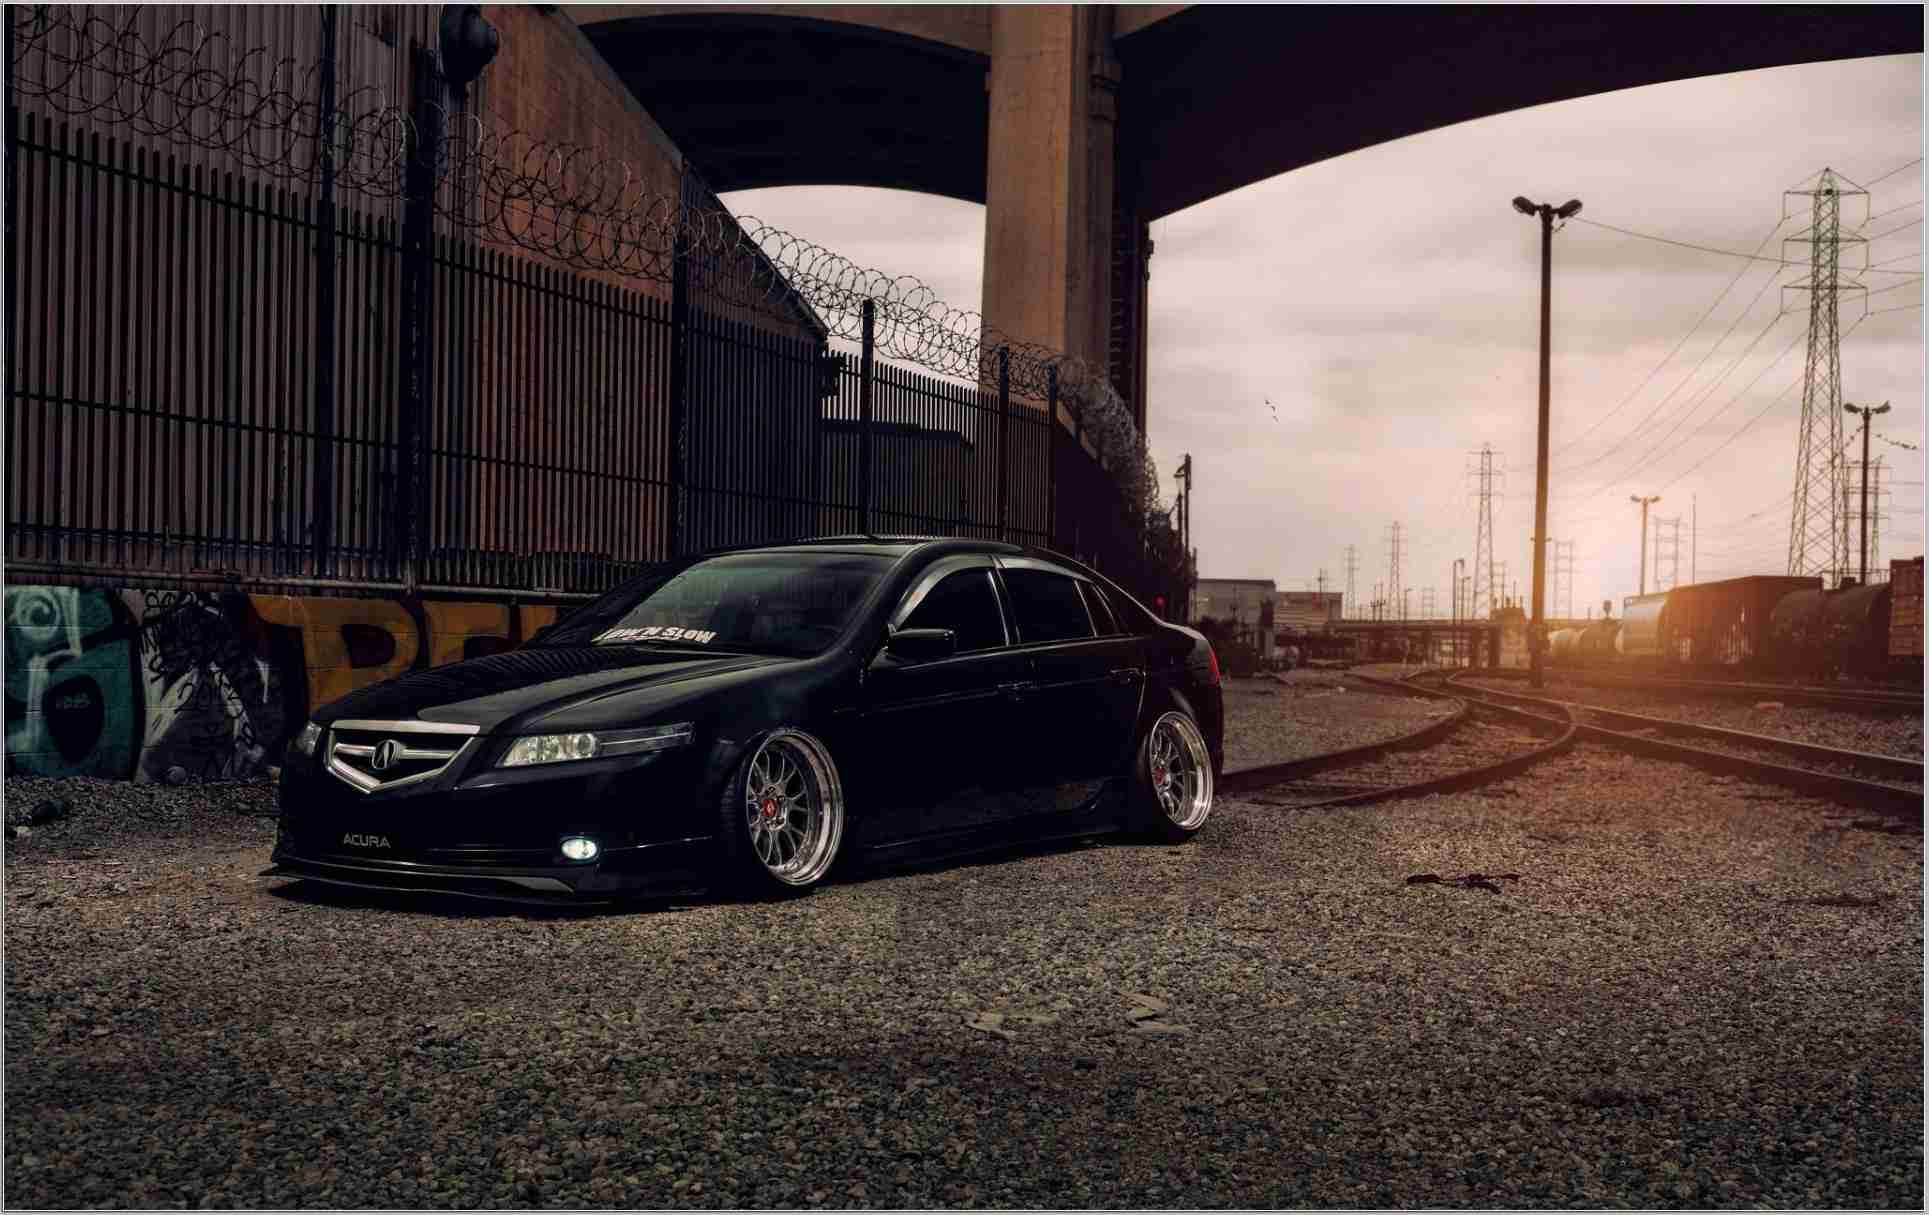 acura tl wallpaper High Definition quality